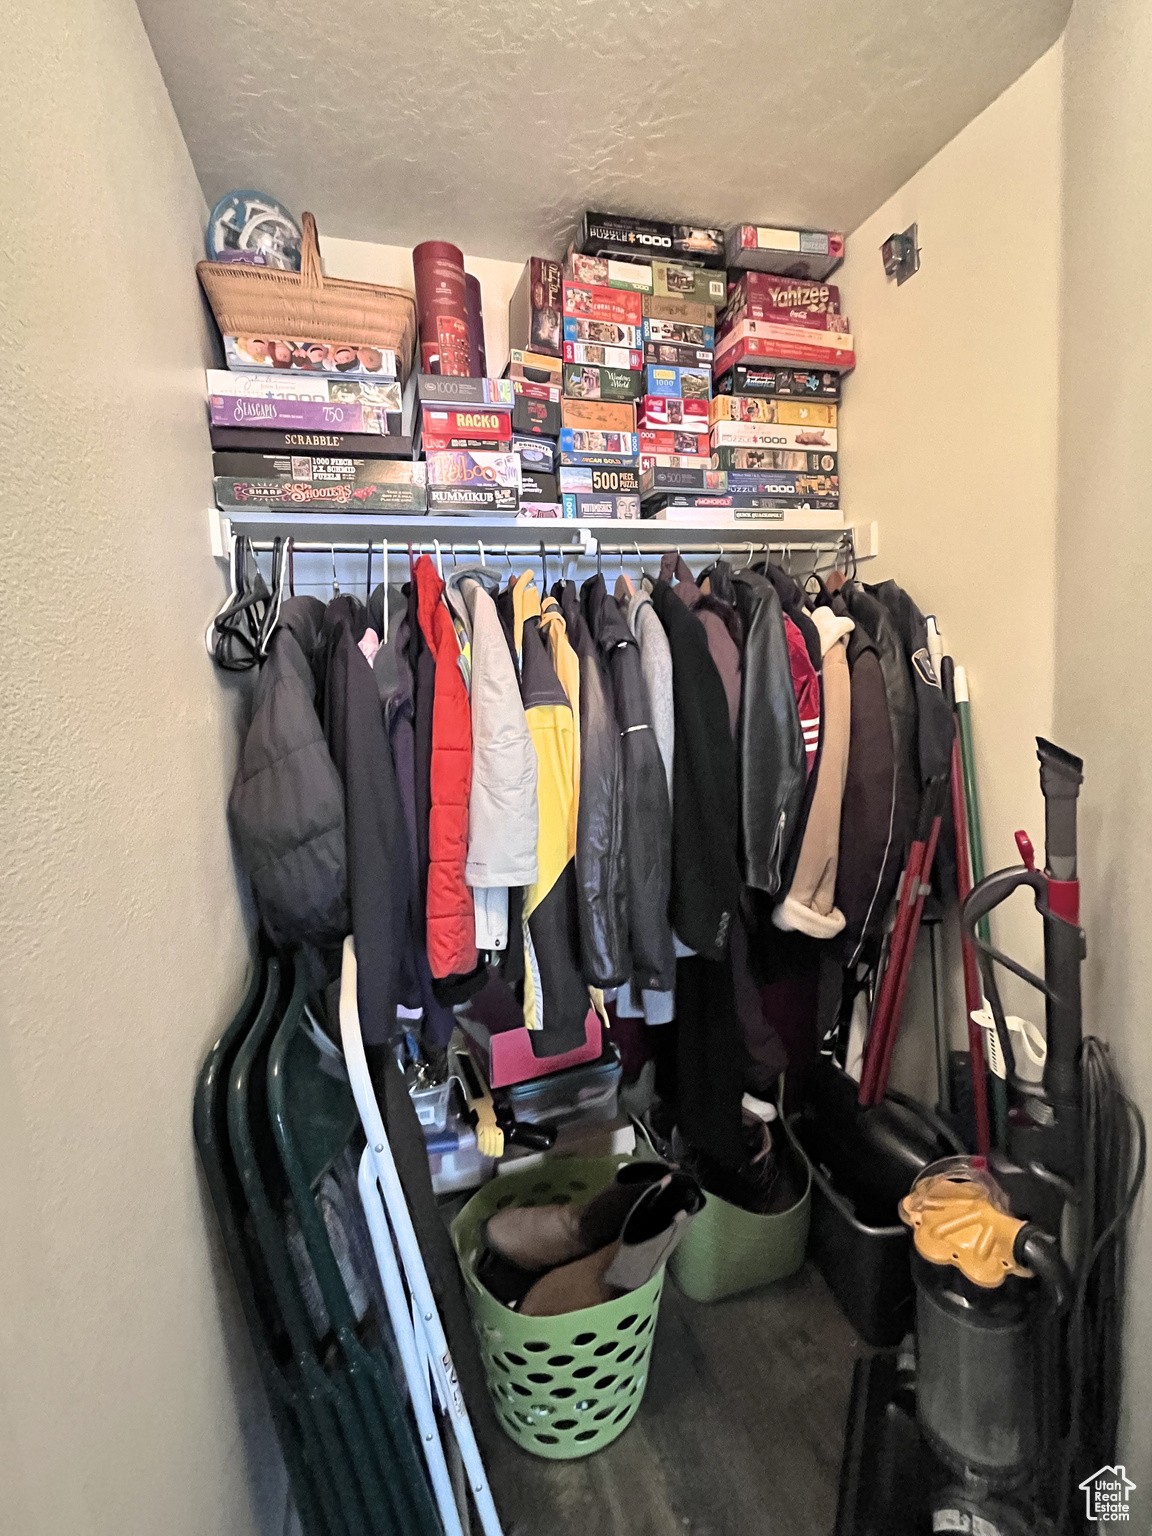 Huge coat closet and storage space near entry